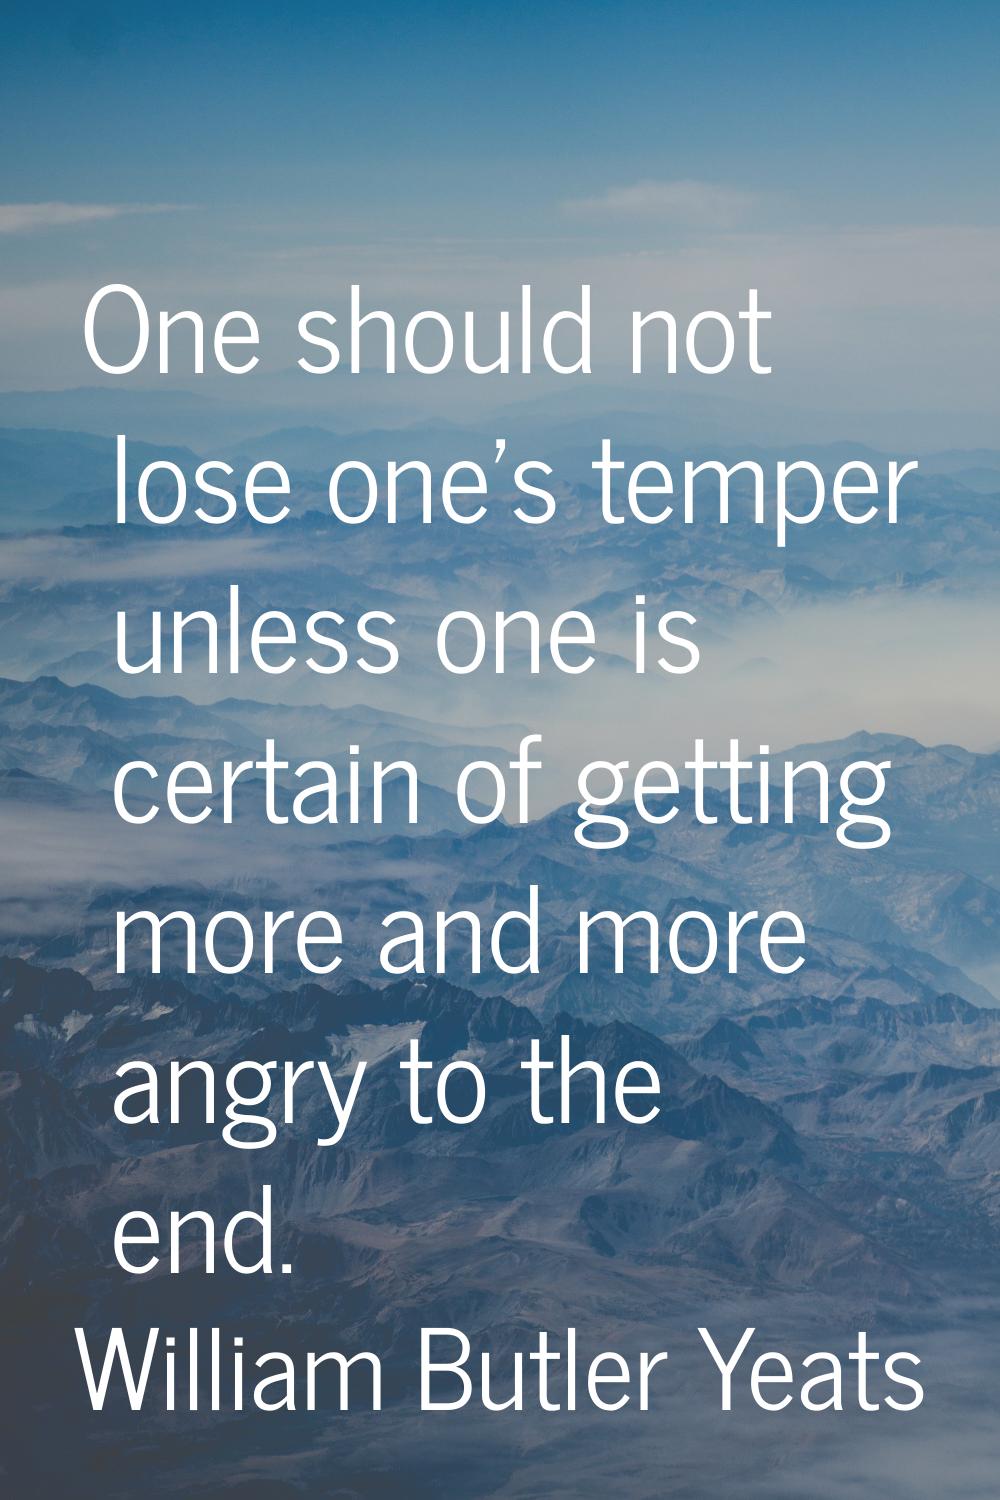 One should not lose one's temper unless one is certain of getting more and more angry to the end.